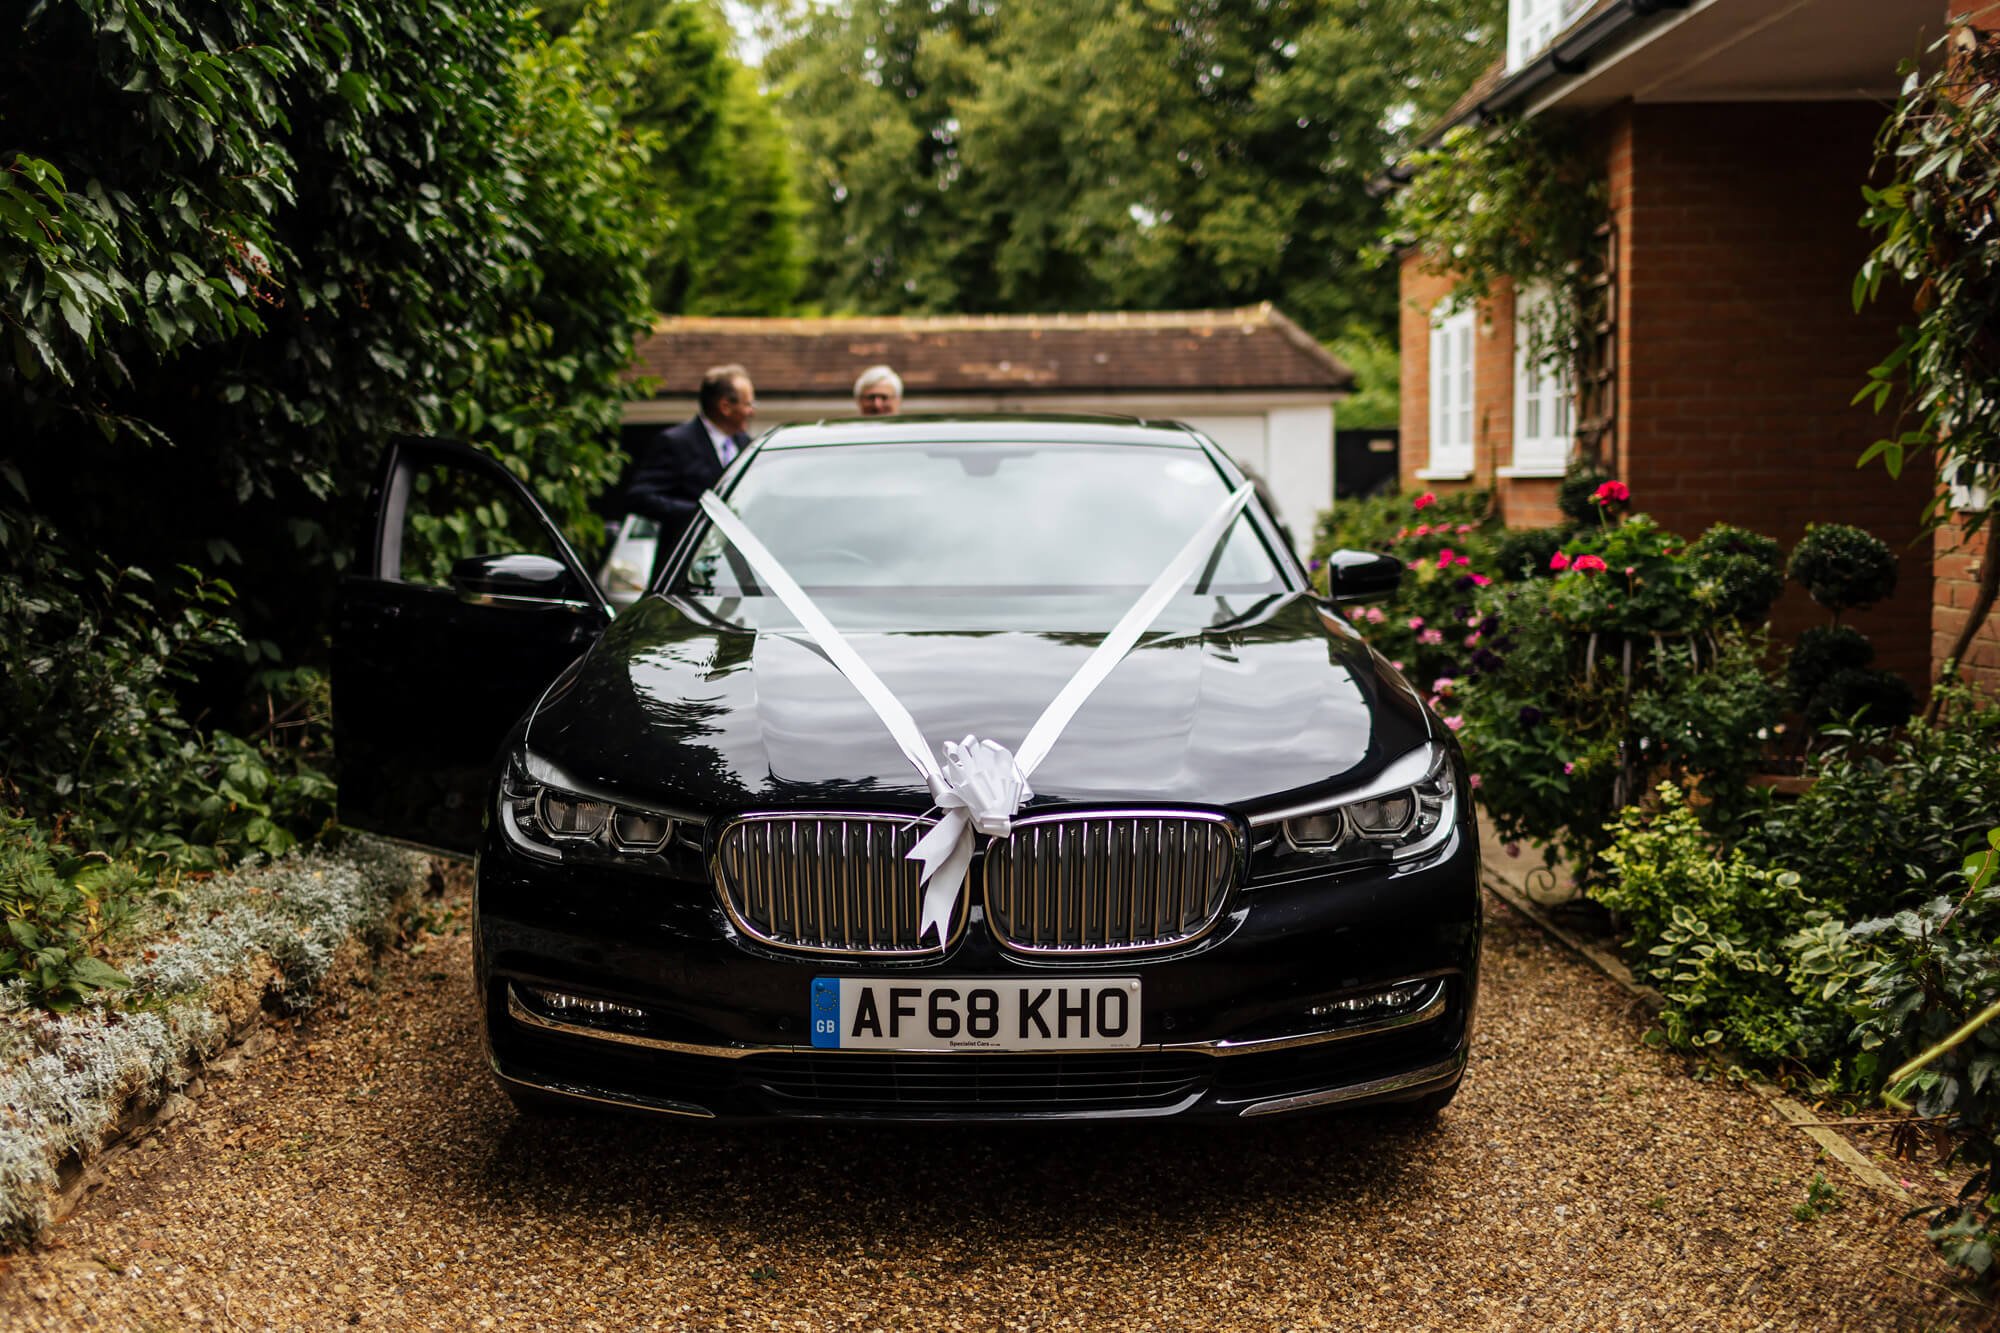 Wedding car with ribbons in the morning